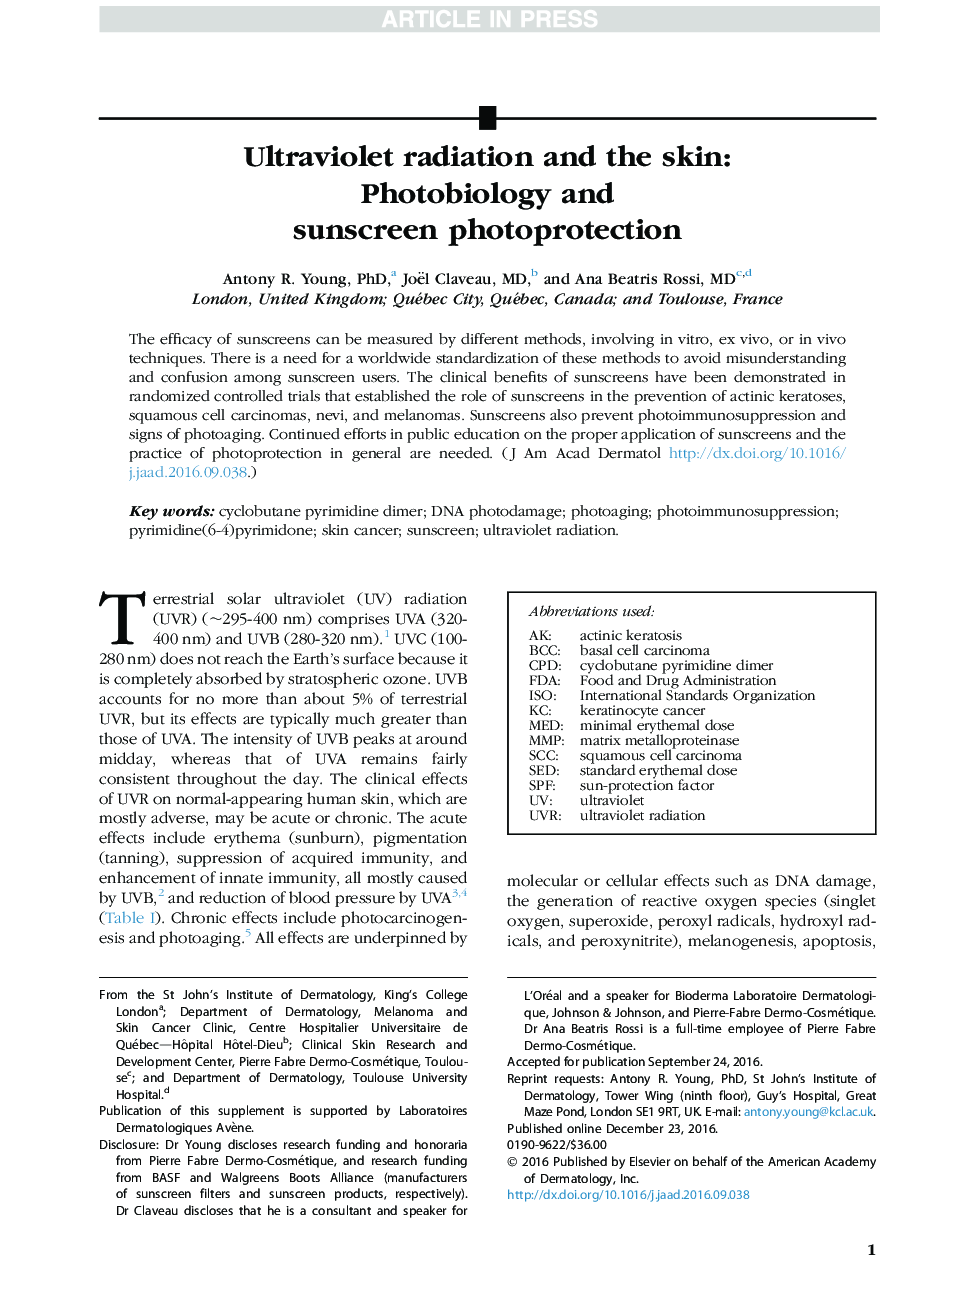 Ultraviolet radiation and the skin: Photobiology and sunscreen photoprotection